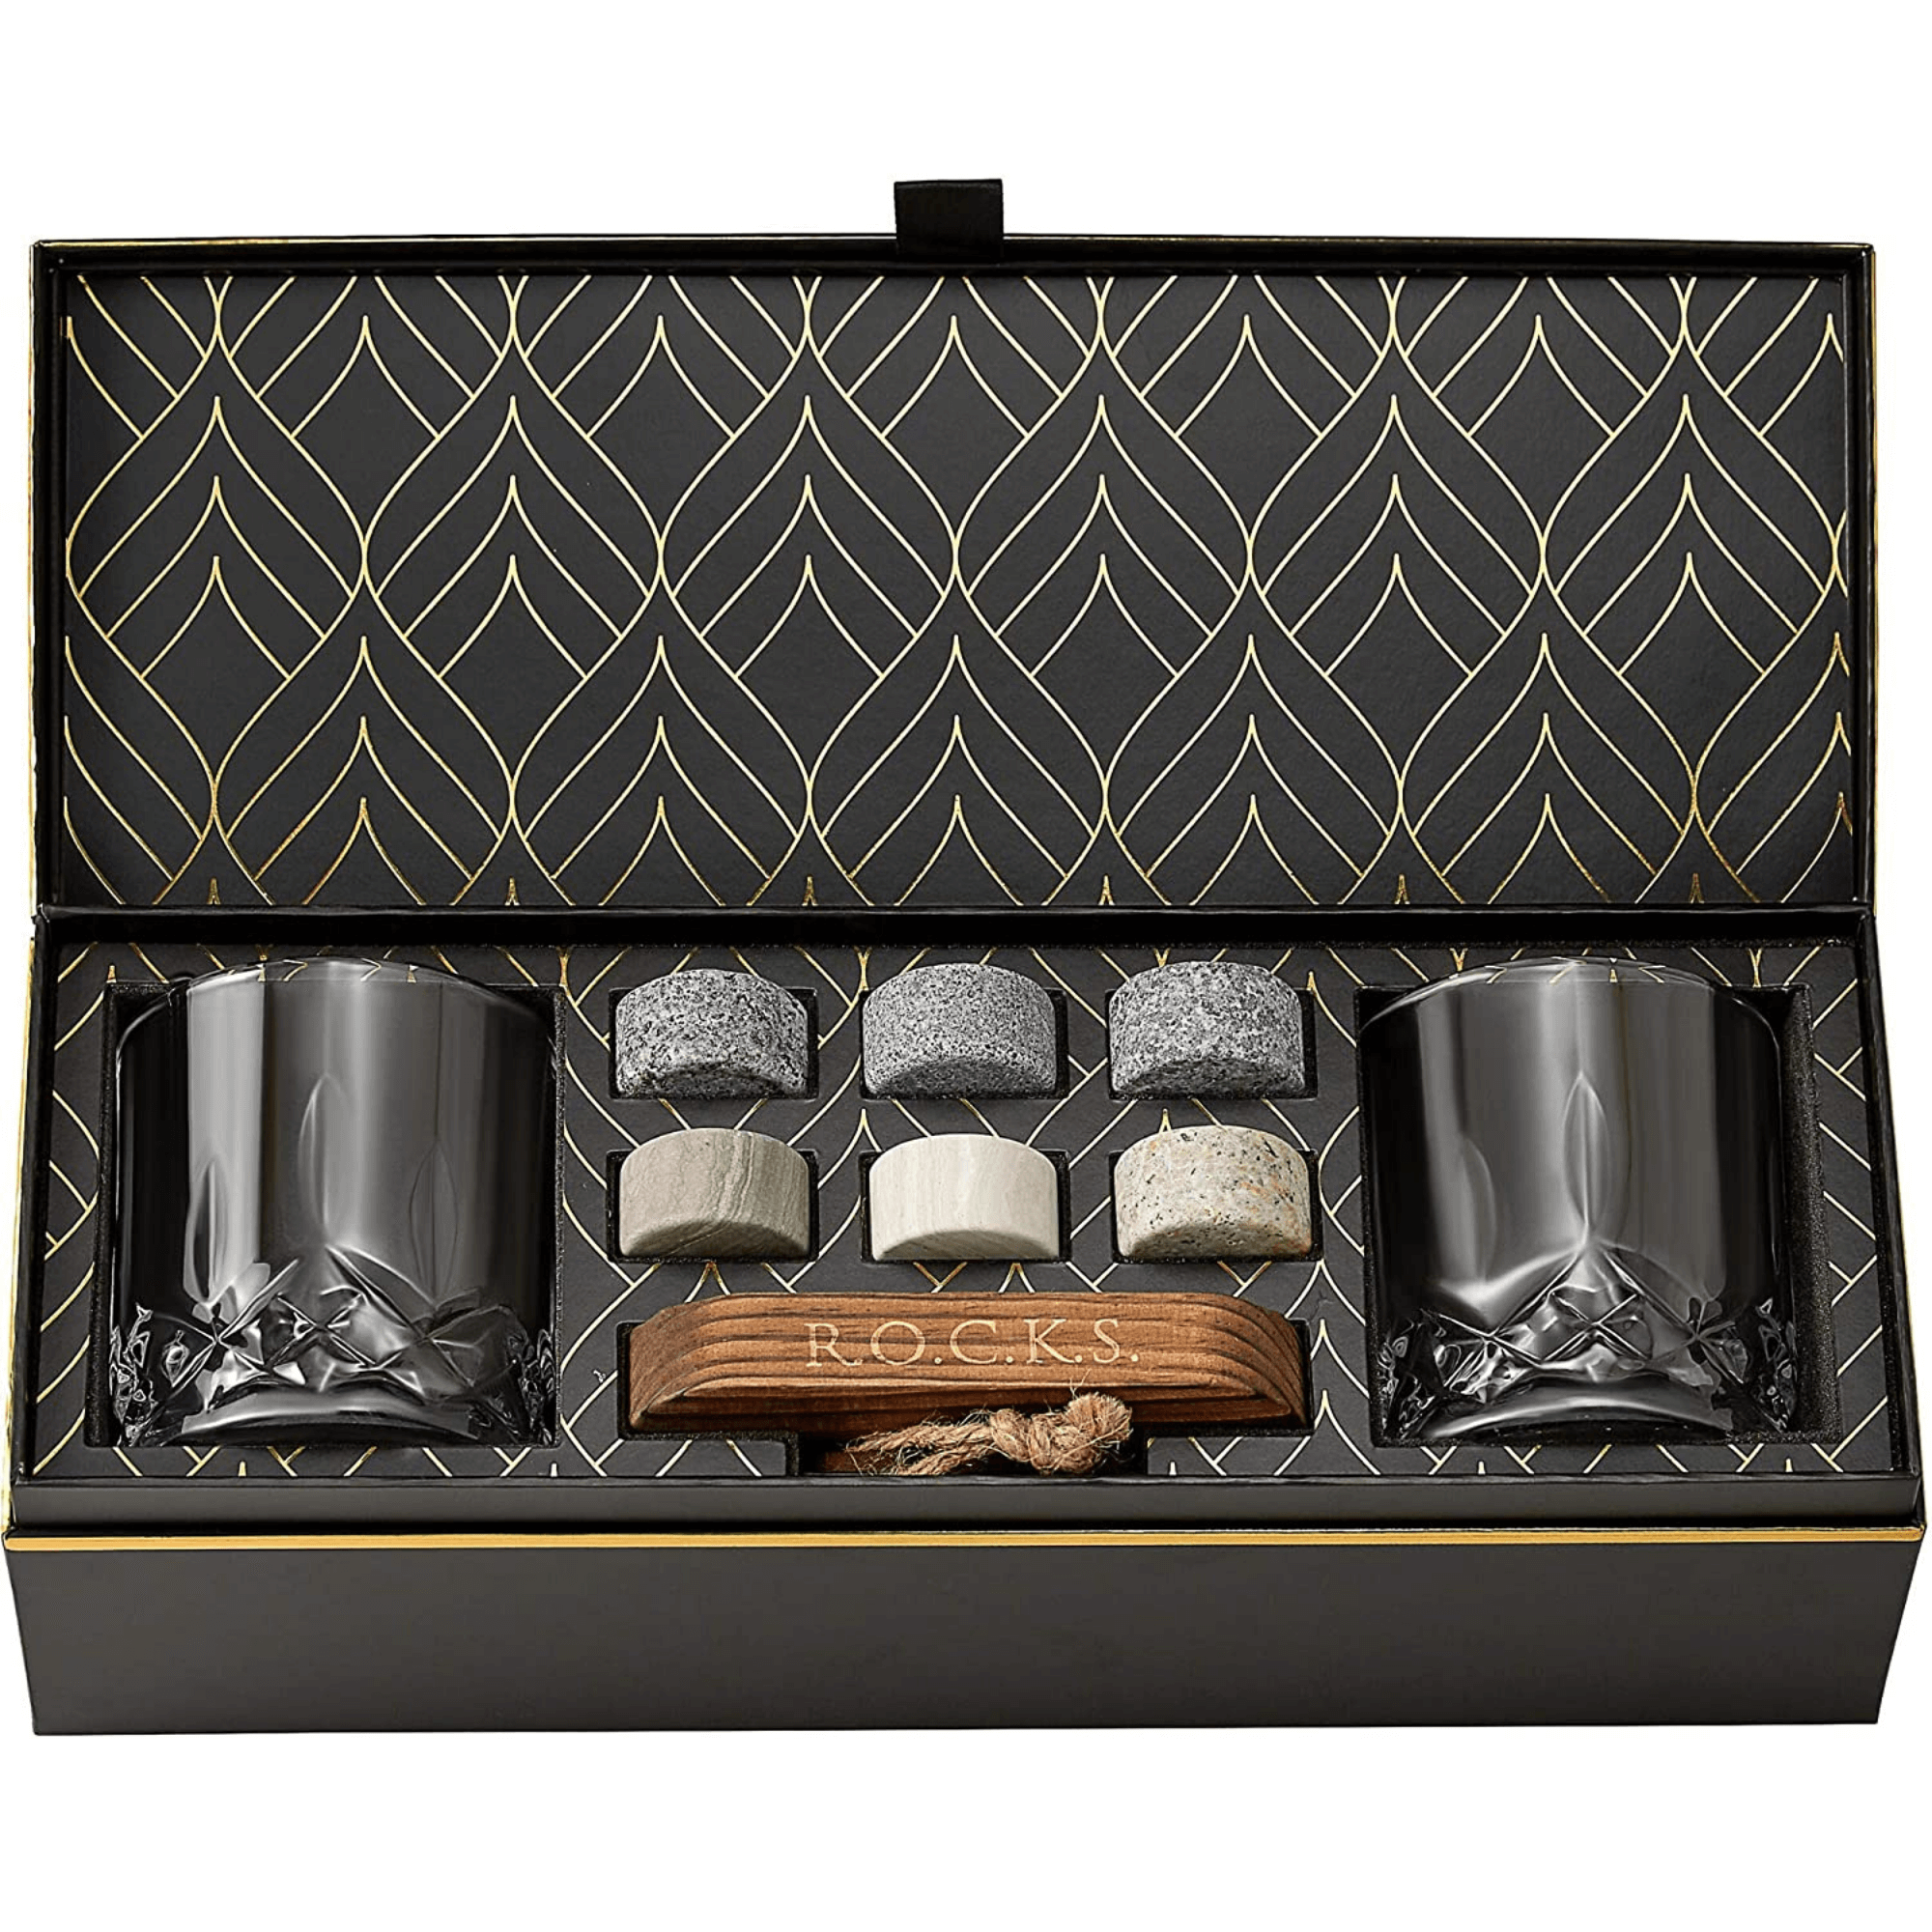 The Connoisseur - 6 Whiskey Stones + Two 2.7 oz Glasses – LORD'S ROCKS